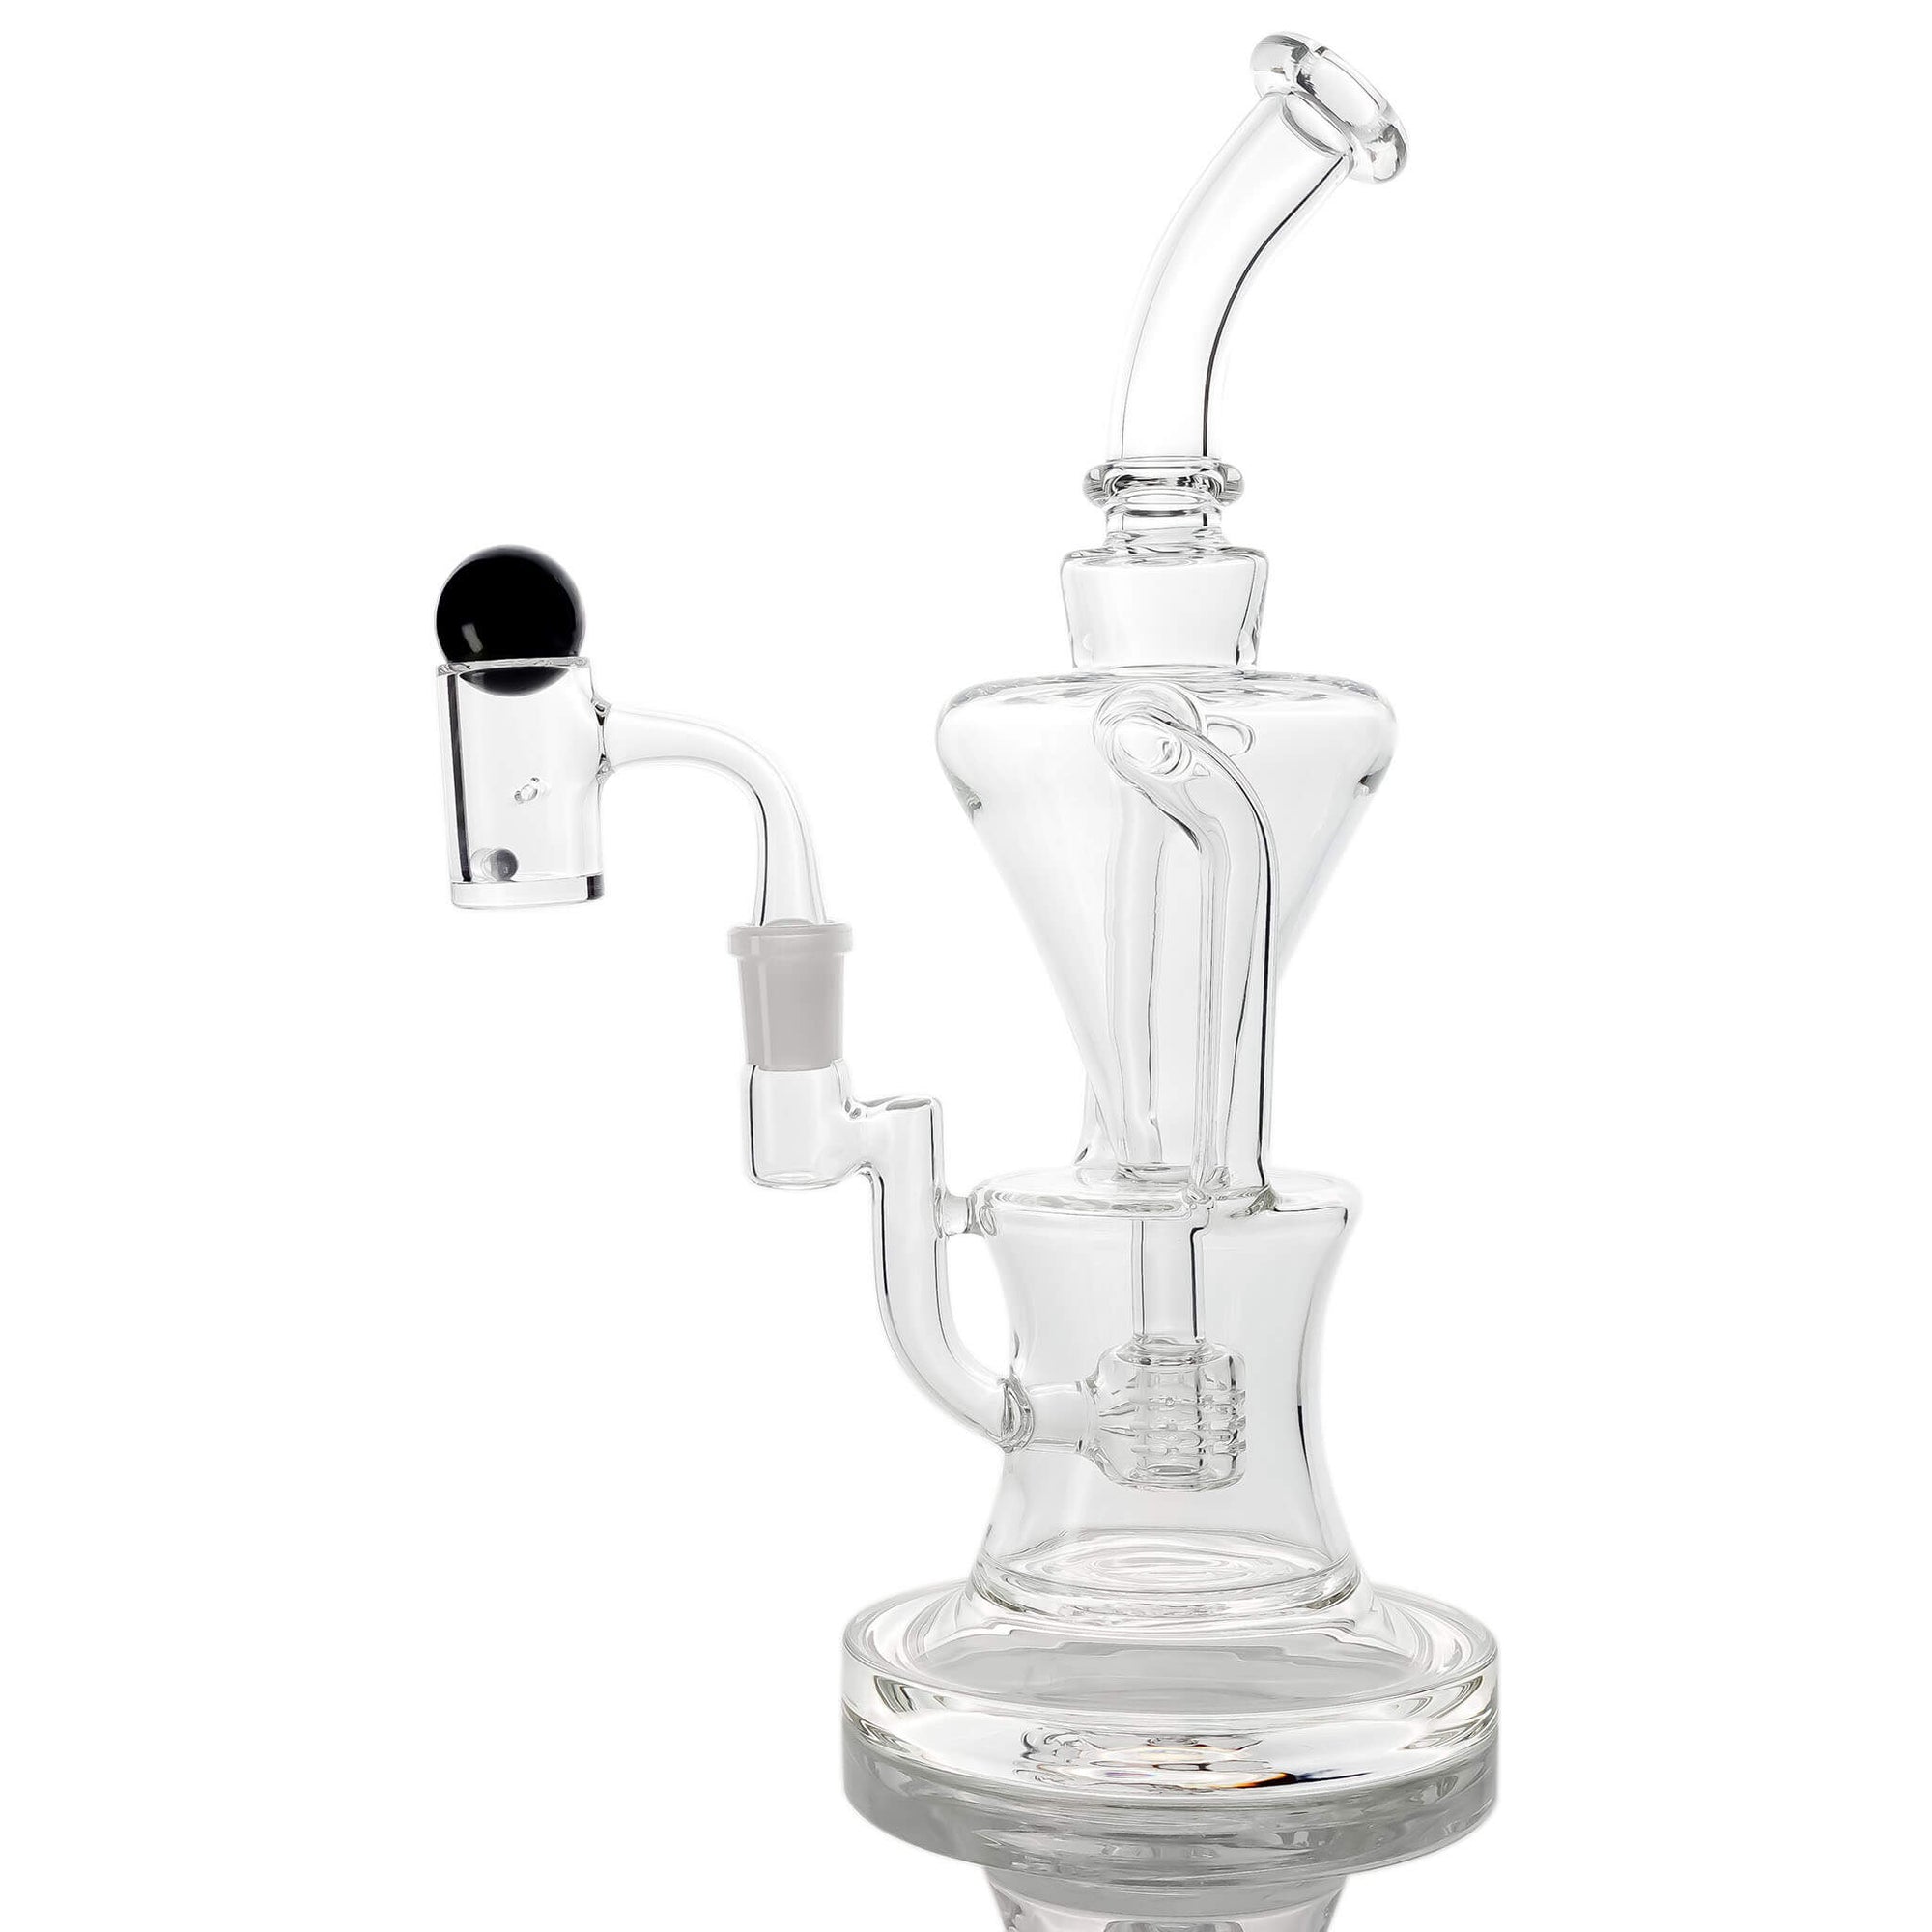 Futurus Recycler 25mm Auto-Spinner Dab Kit | Quartz Terp Pearls View | the dabbing specialists